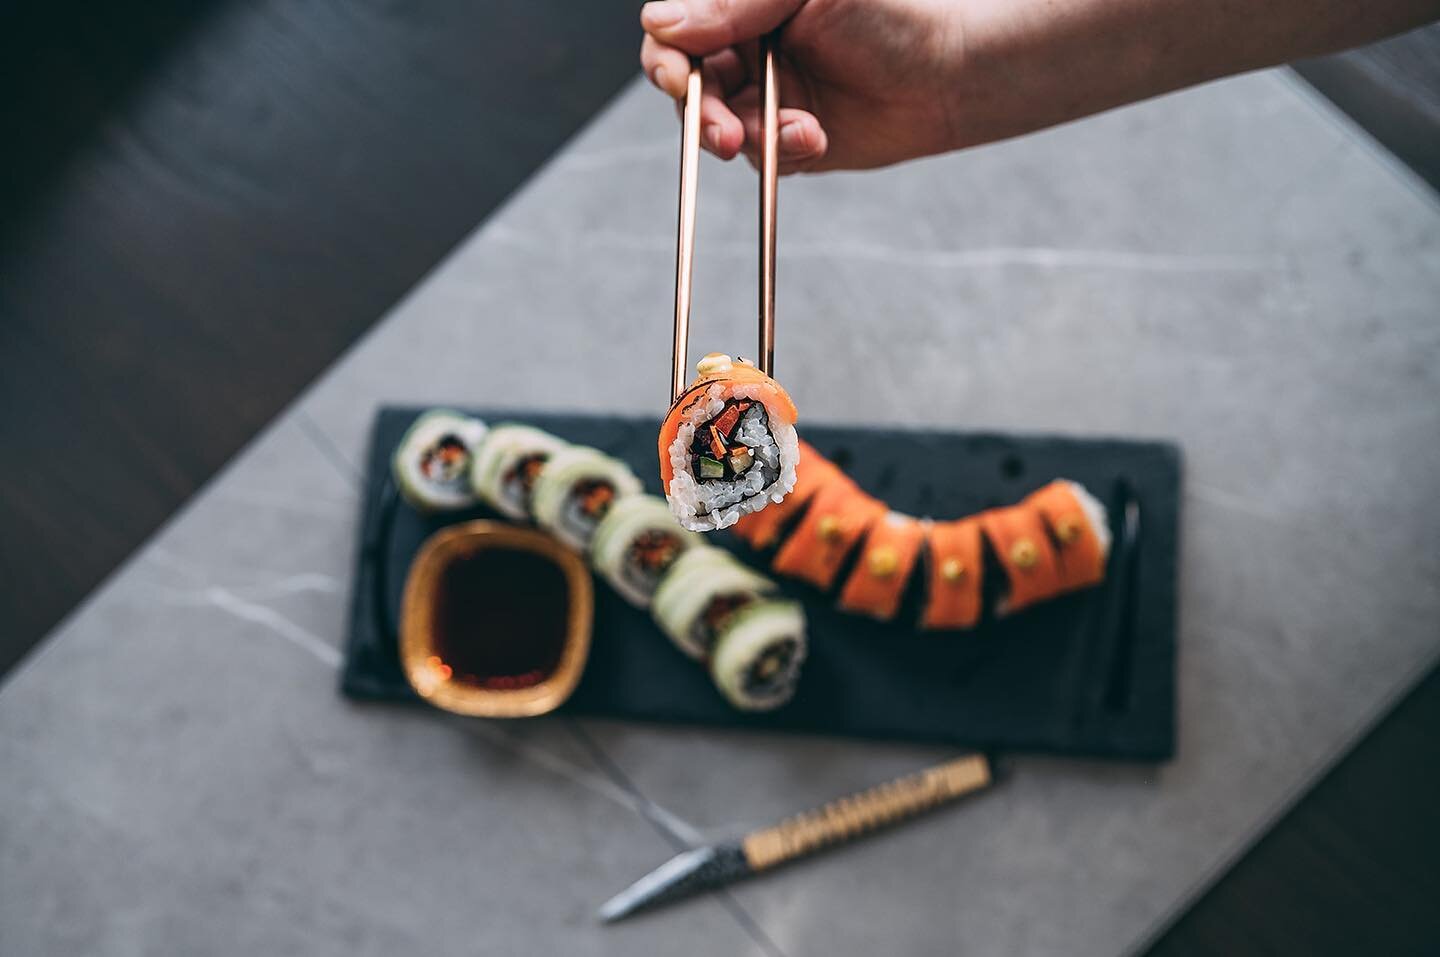 You guys keep asking for it&hellip; Soo guess what&rsquo;s back!? SUSHI!! 🍣 Get it while it lasts!

📸 @earthinbloomphoto 
&bull;
&bull;
&bull;
#fuelyouradventure #sushitime #vegansushi #plantbasedsushi #sushirecipes #foodphotography